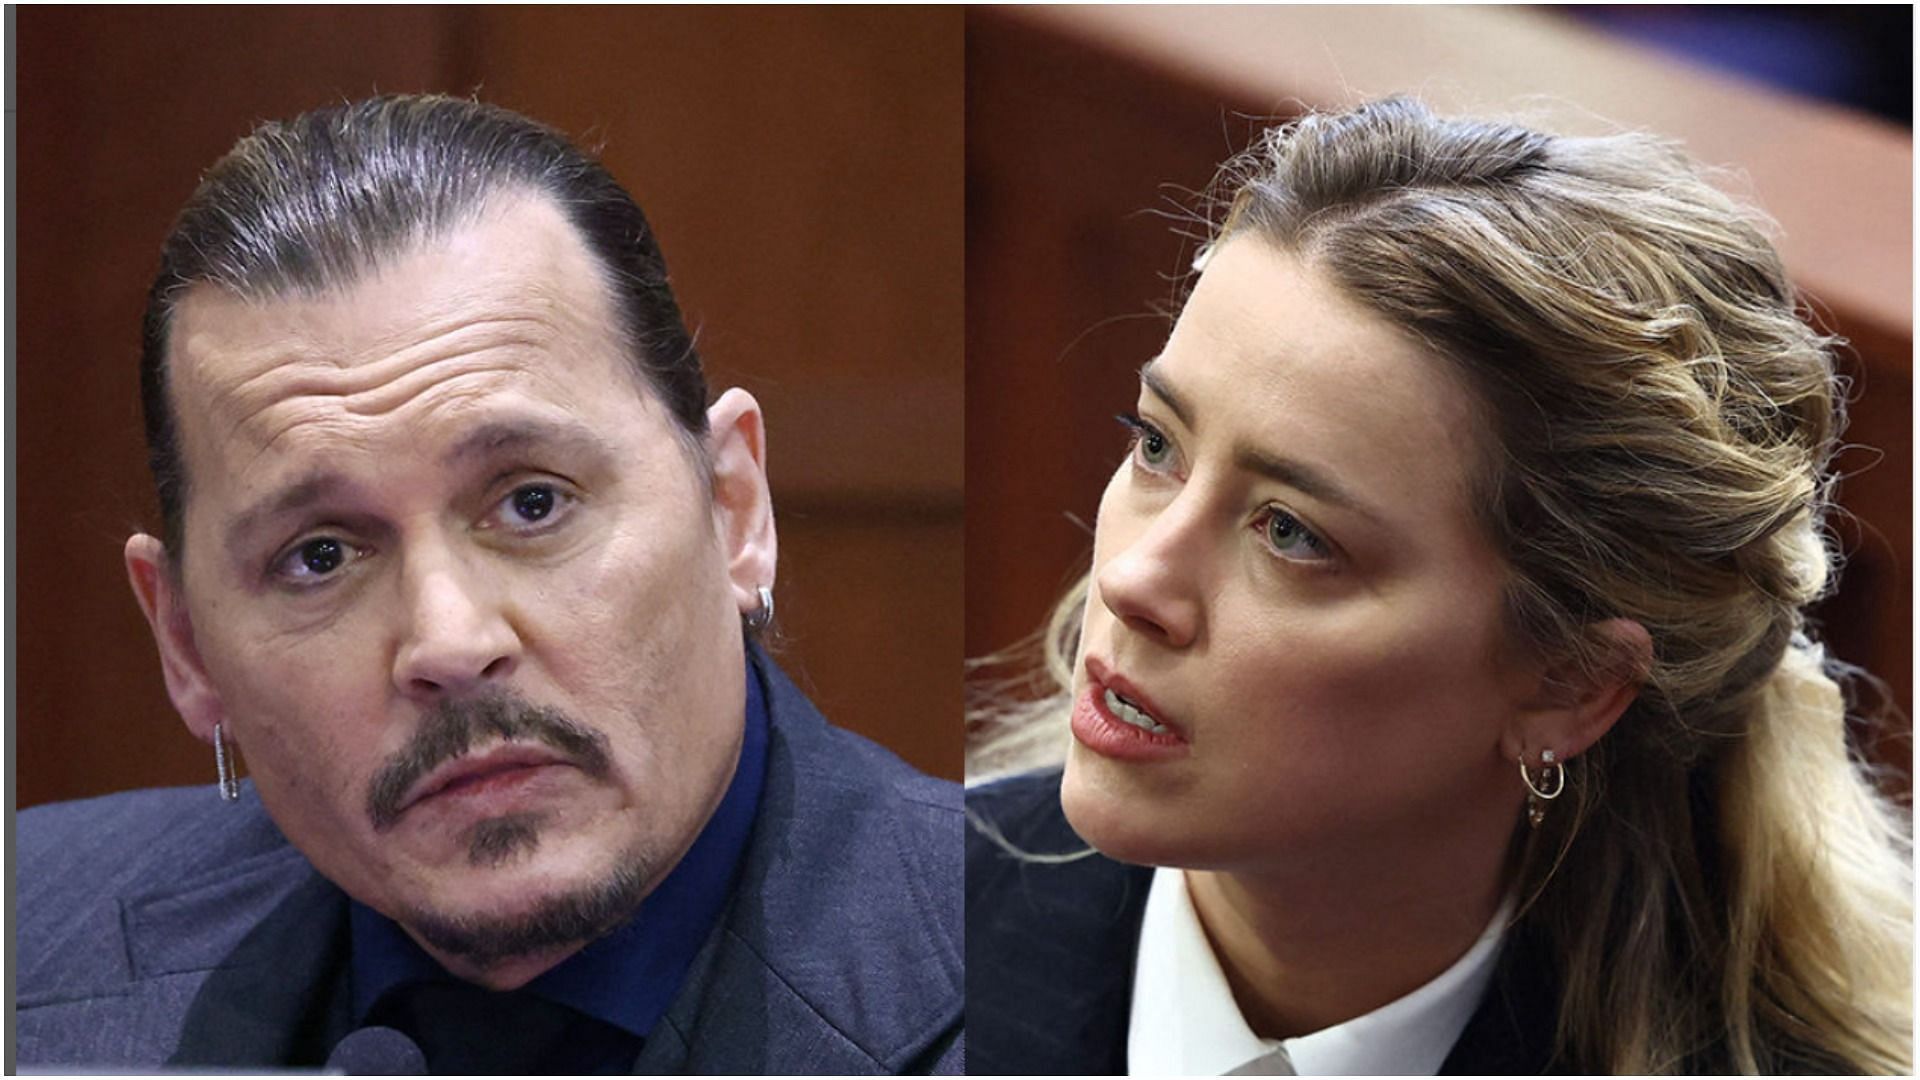 Some Starbucks drive-thrus have been seen having tip jars labeled by the name of battling ex-spouses &quot;Johnny Depp&quot; and &quot;Amber Heard.&quot; (Image via news/ Instagram)